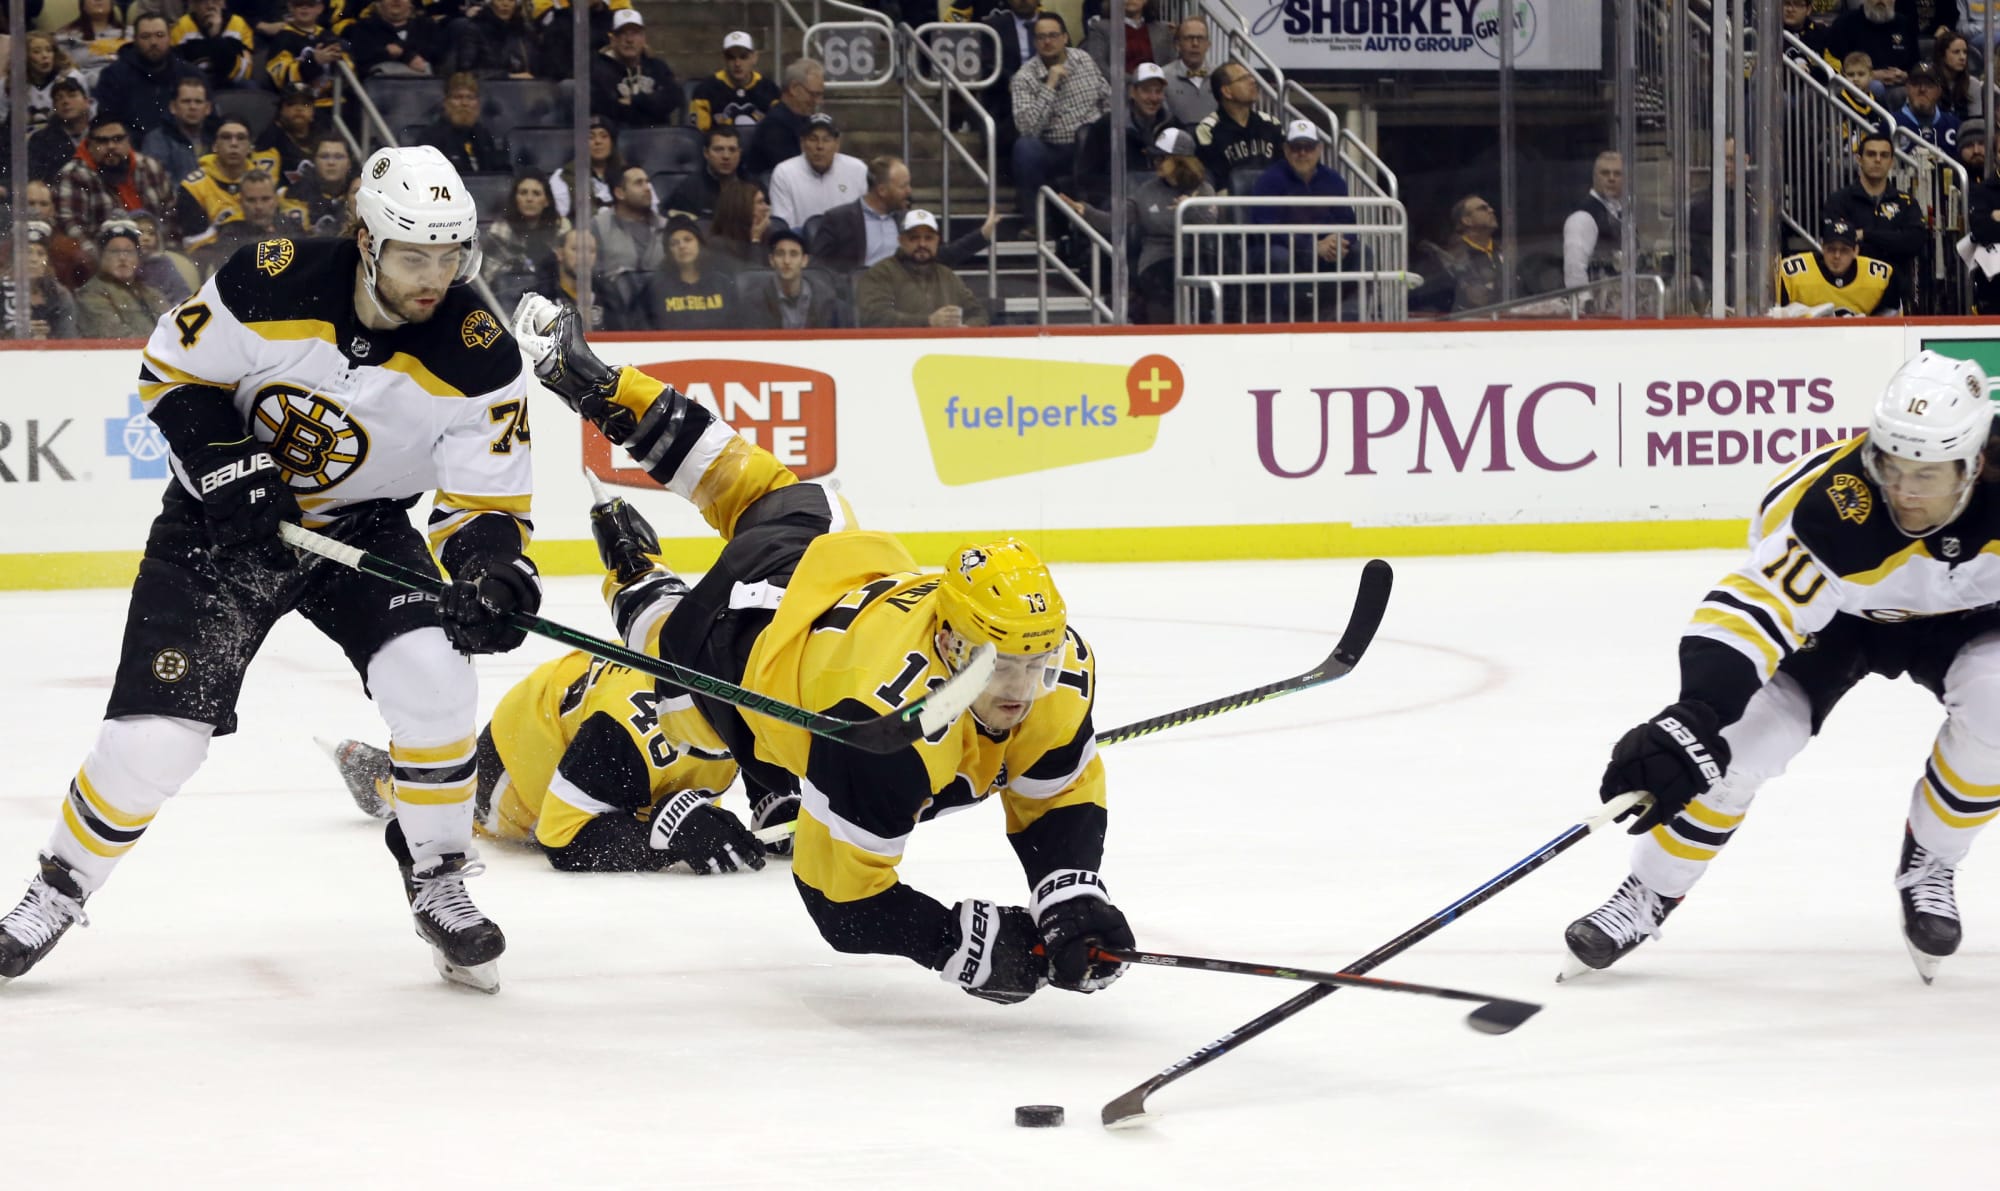 Bruins vs Penguins 1/26/21 Game preview, lineups, and more